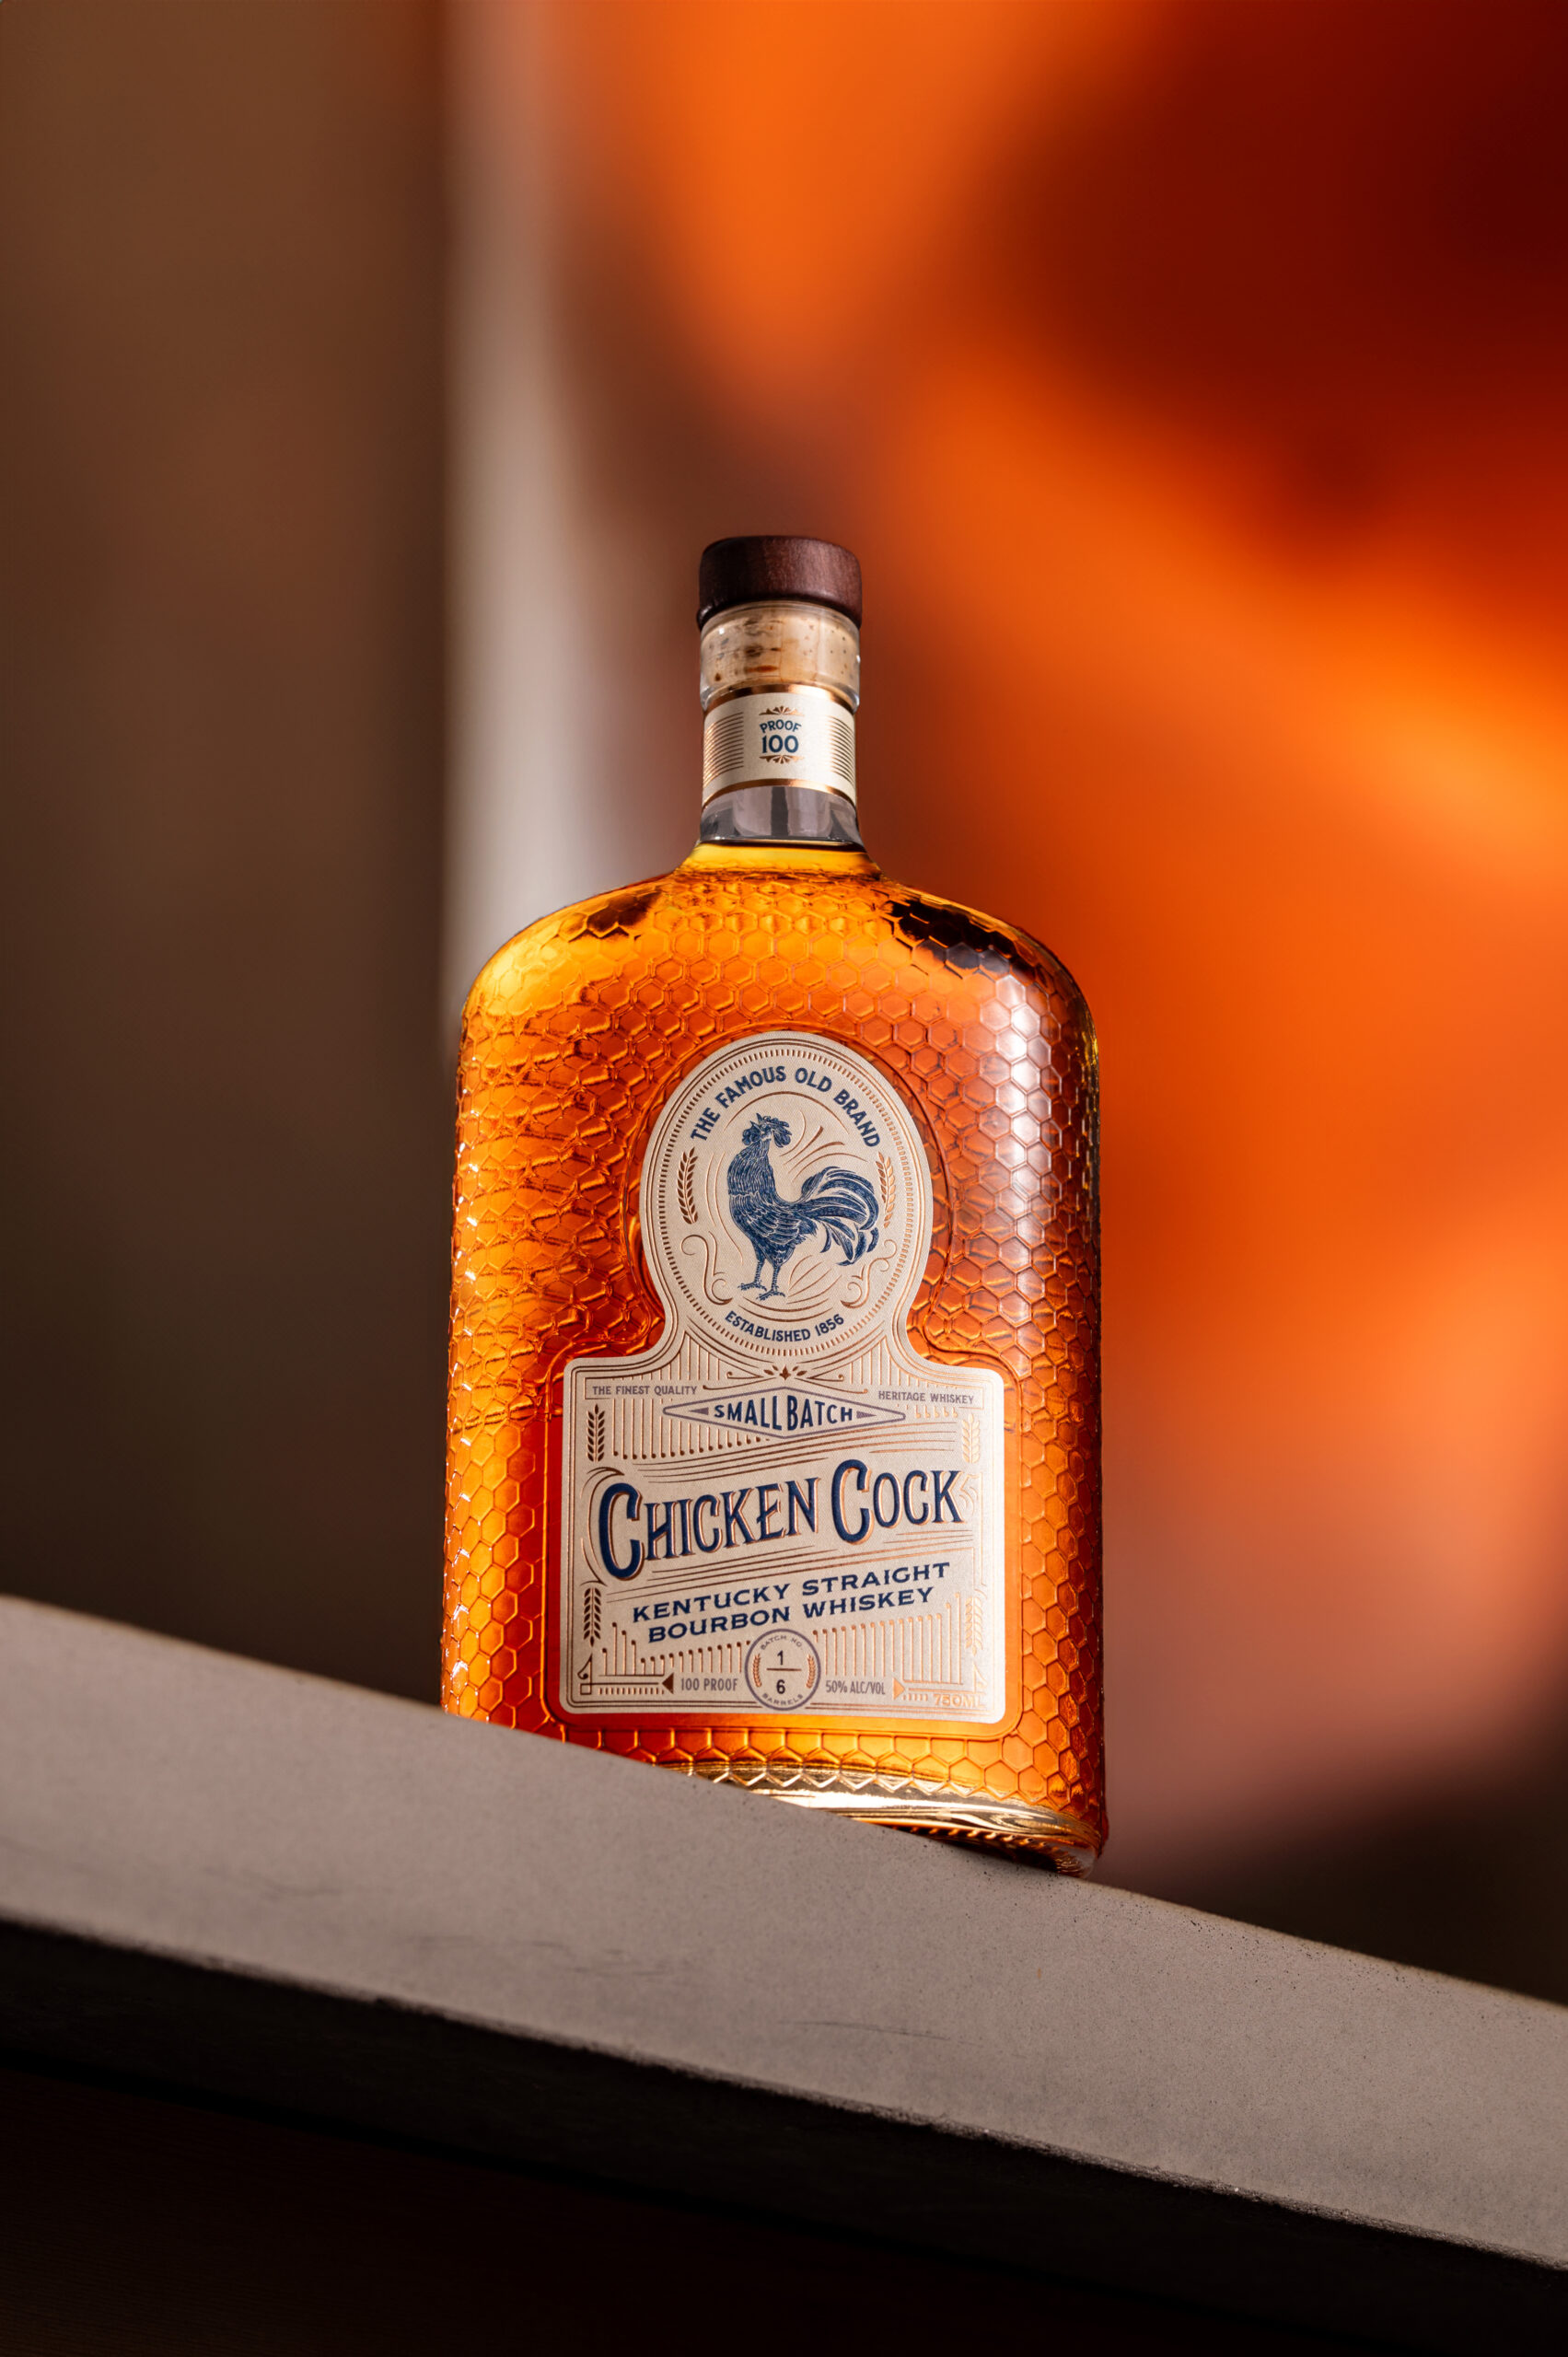 Chicken Cock Whiskey Introduces New Small Batch Bourbon Line